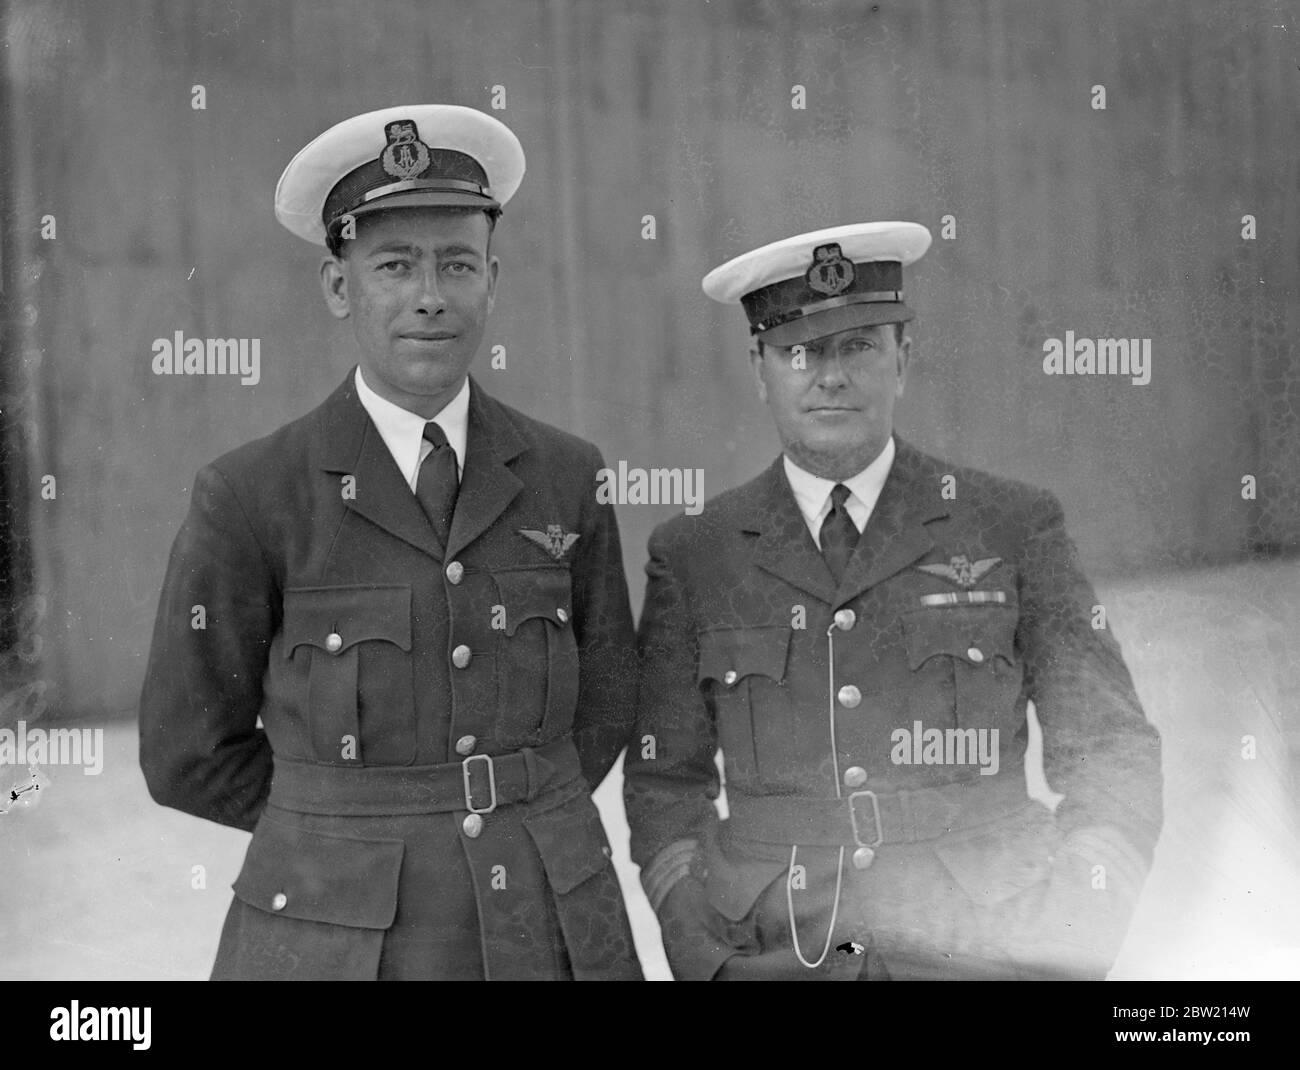 Captain A. S. Wilcockson (right) and First Officer G. H. Bowes at Hythe, Southampton where they have been preparing for the first experimental commercial transatlantic crossing to be made by the flying boat Caledonia next week (June 24). 18 June 1937 Stock Photo